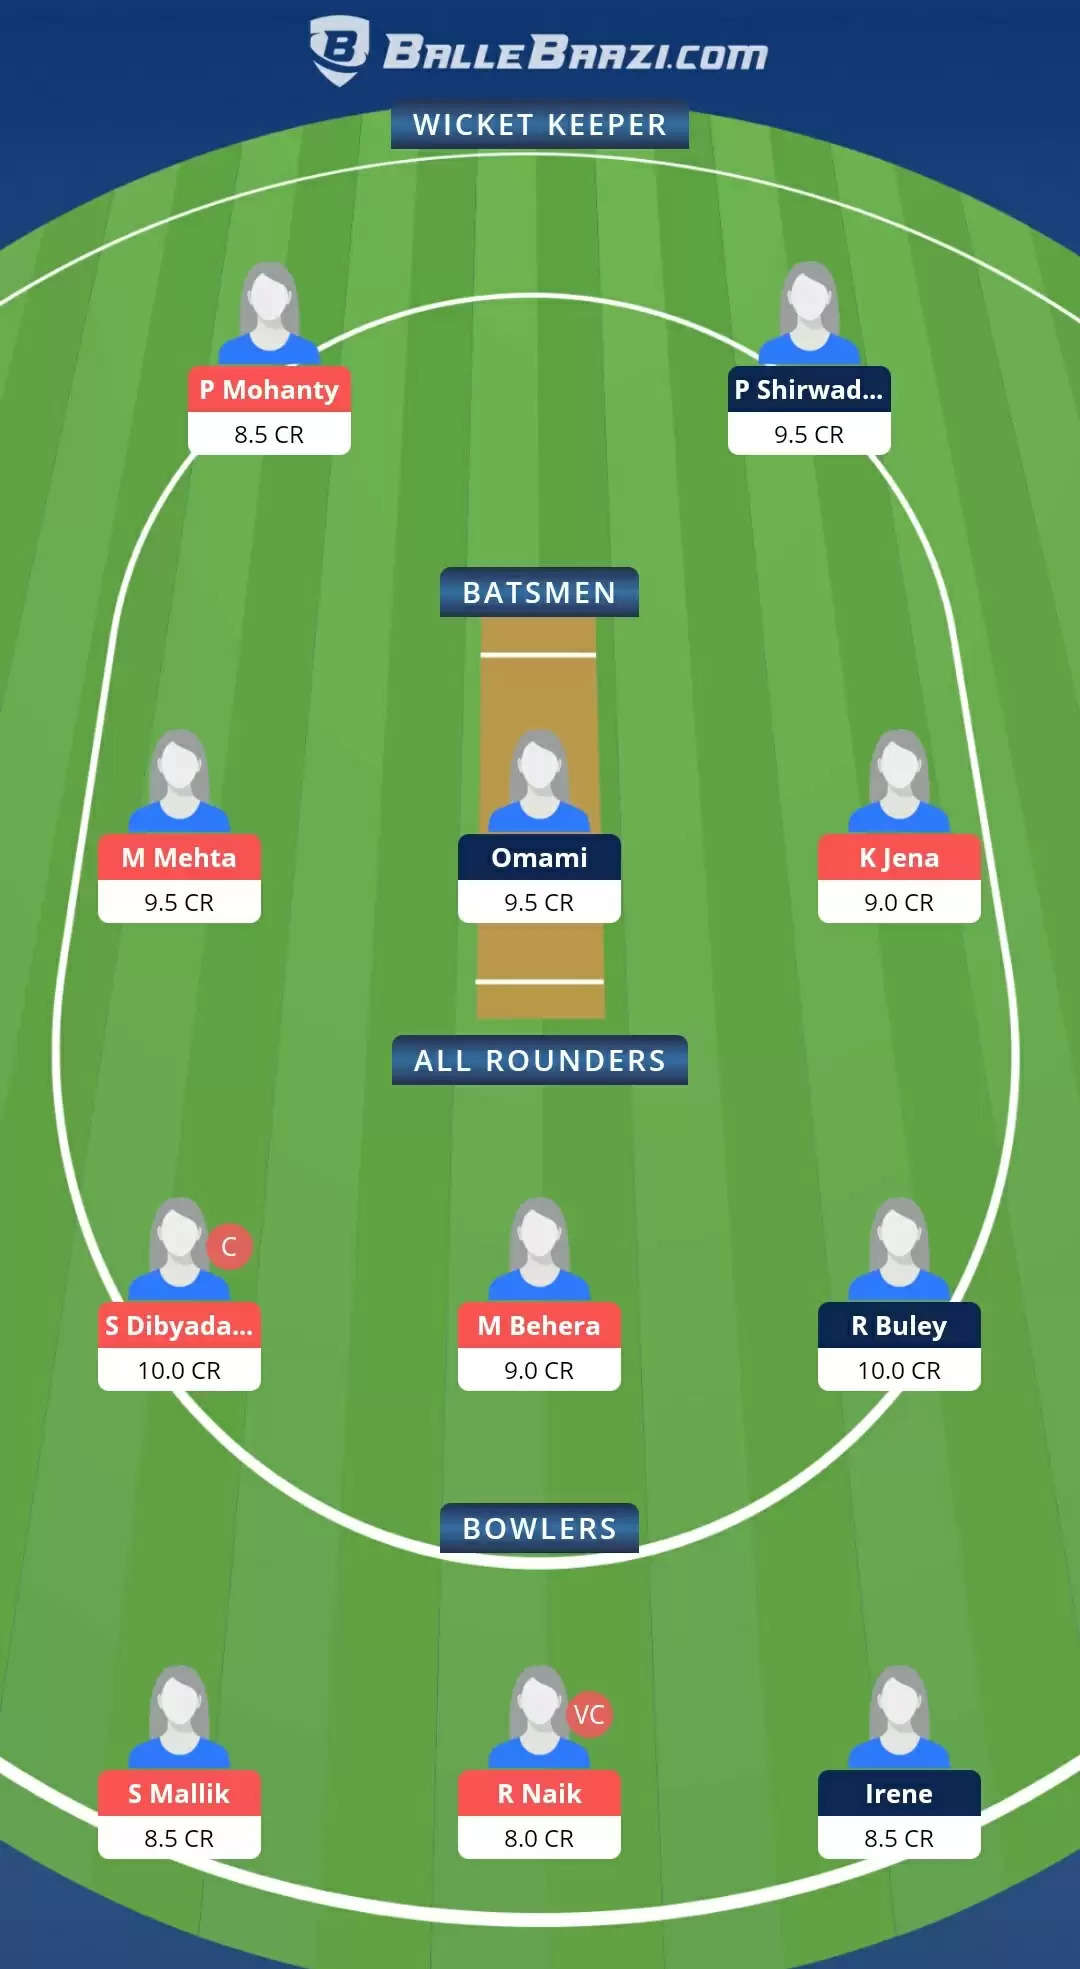 Women’s Senior One-Day trophy 2021, Match 97: MIZ-W vs ODS-W Dream11 Prediction, Fantasy Cricket Tips, Team, Playing 11, Pitch Report, Weather Conditions and Injury Update